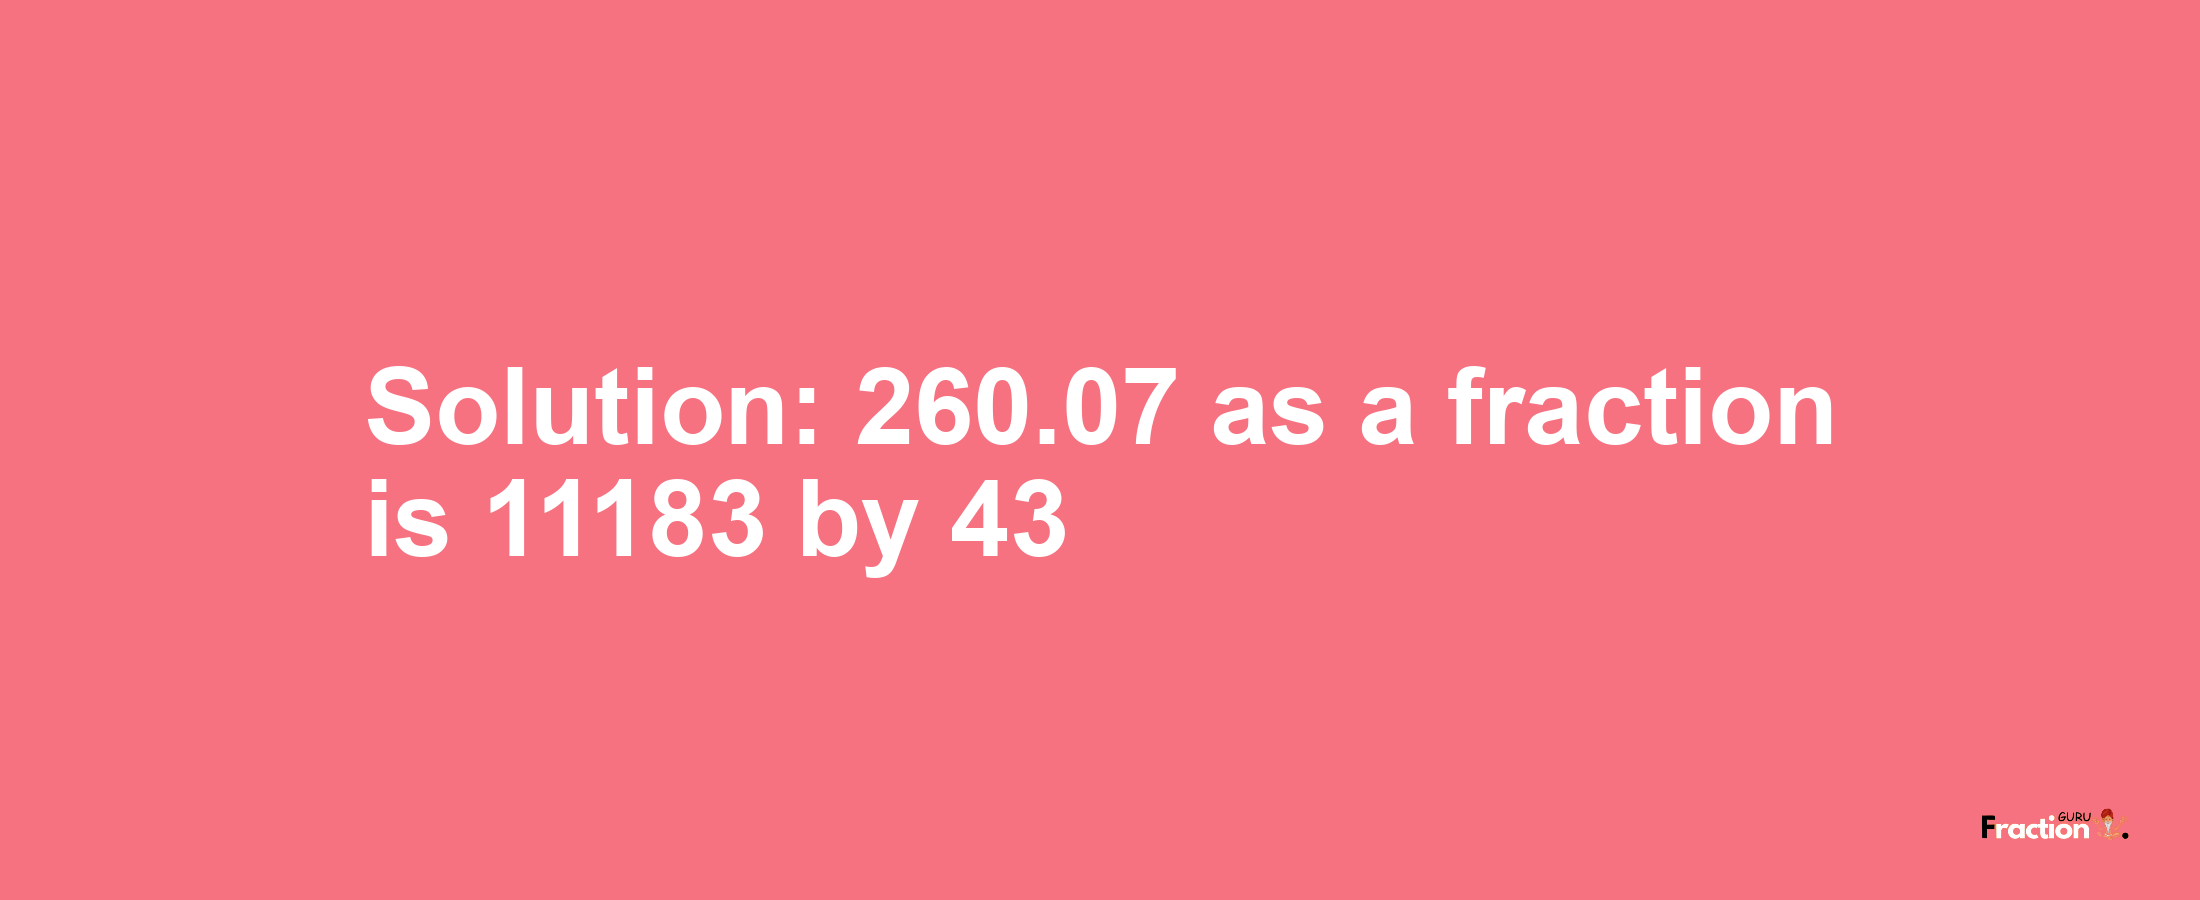 Solution:260.07 as a fraction is 11183/43